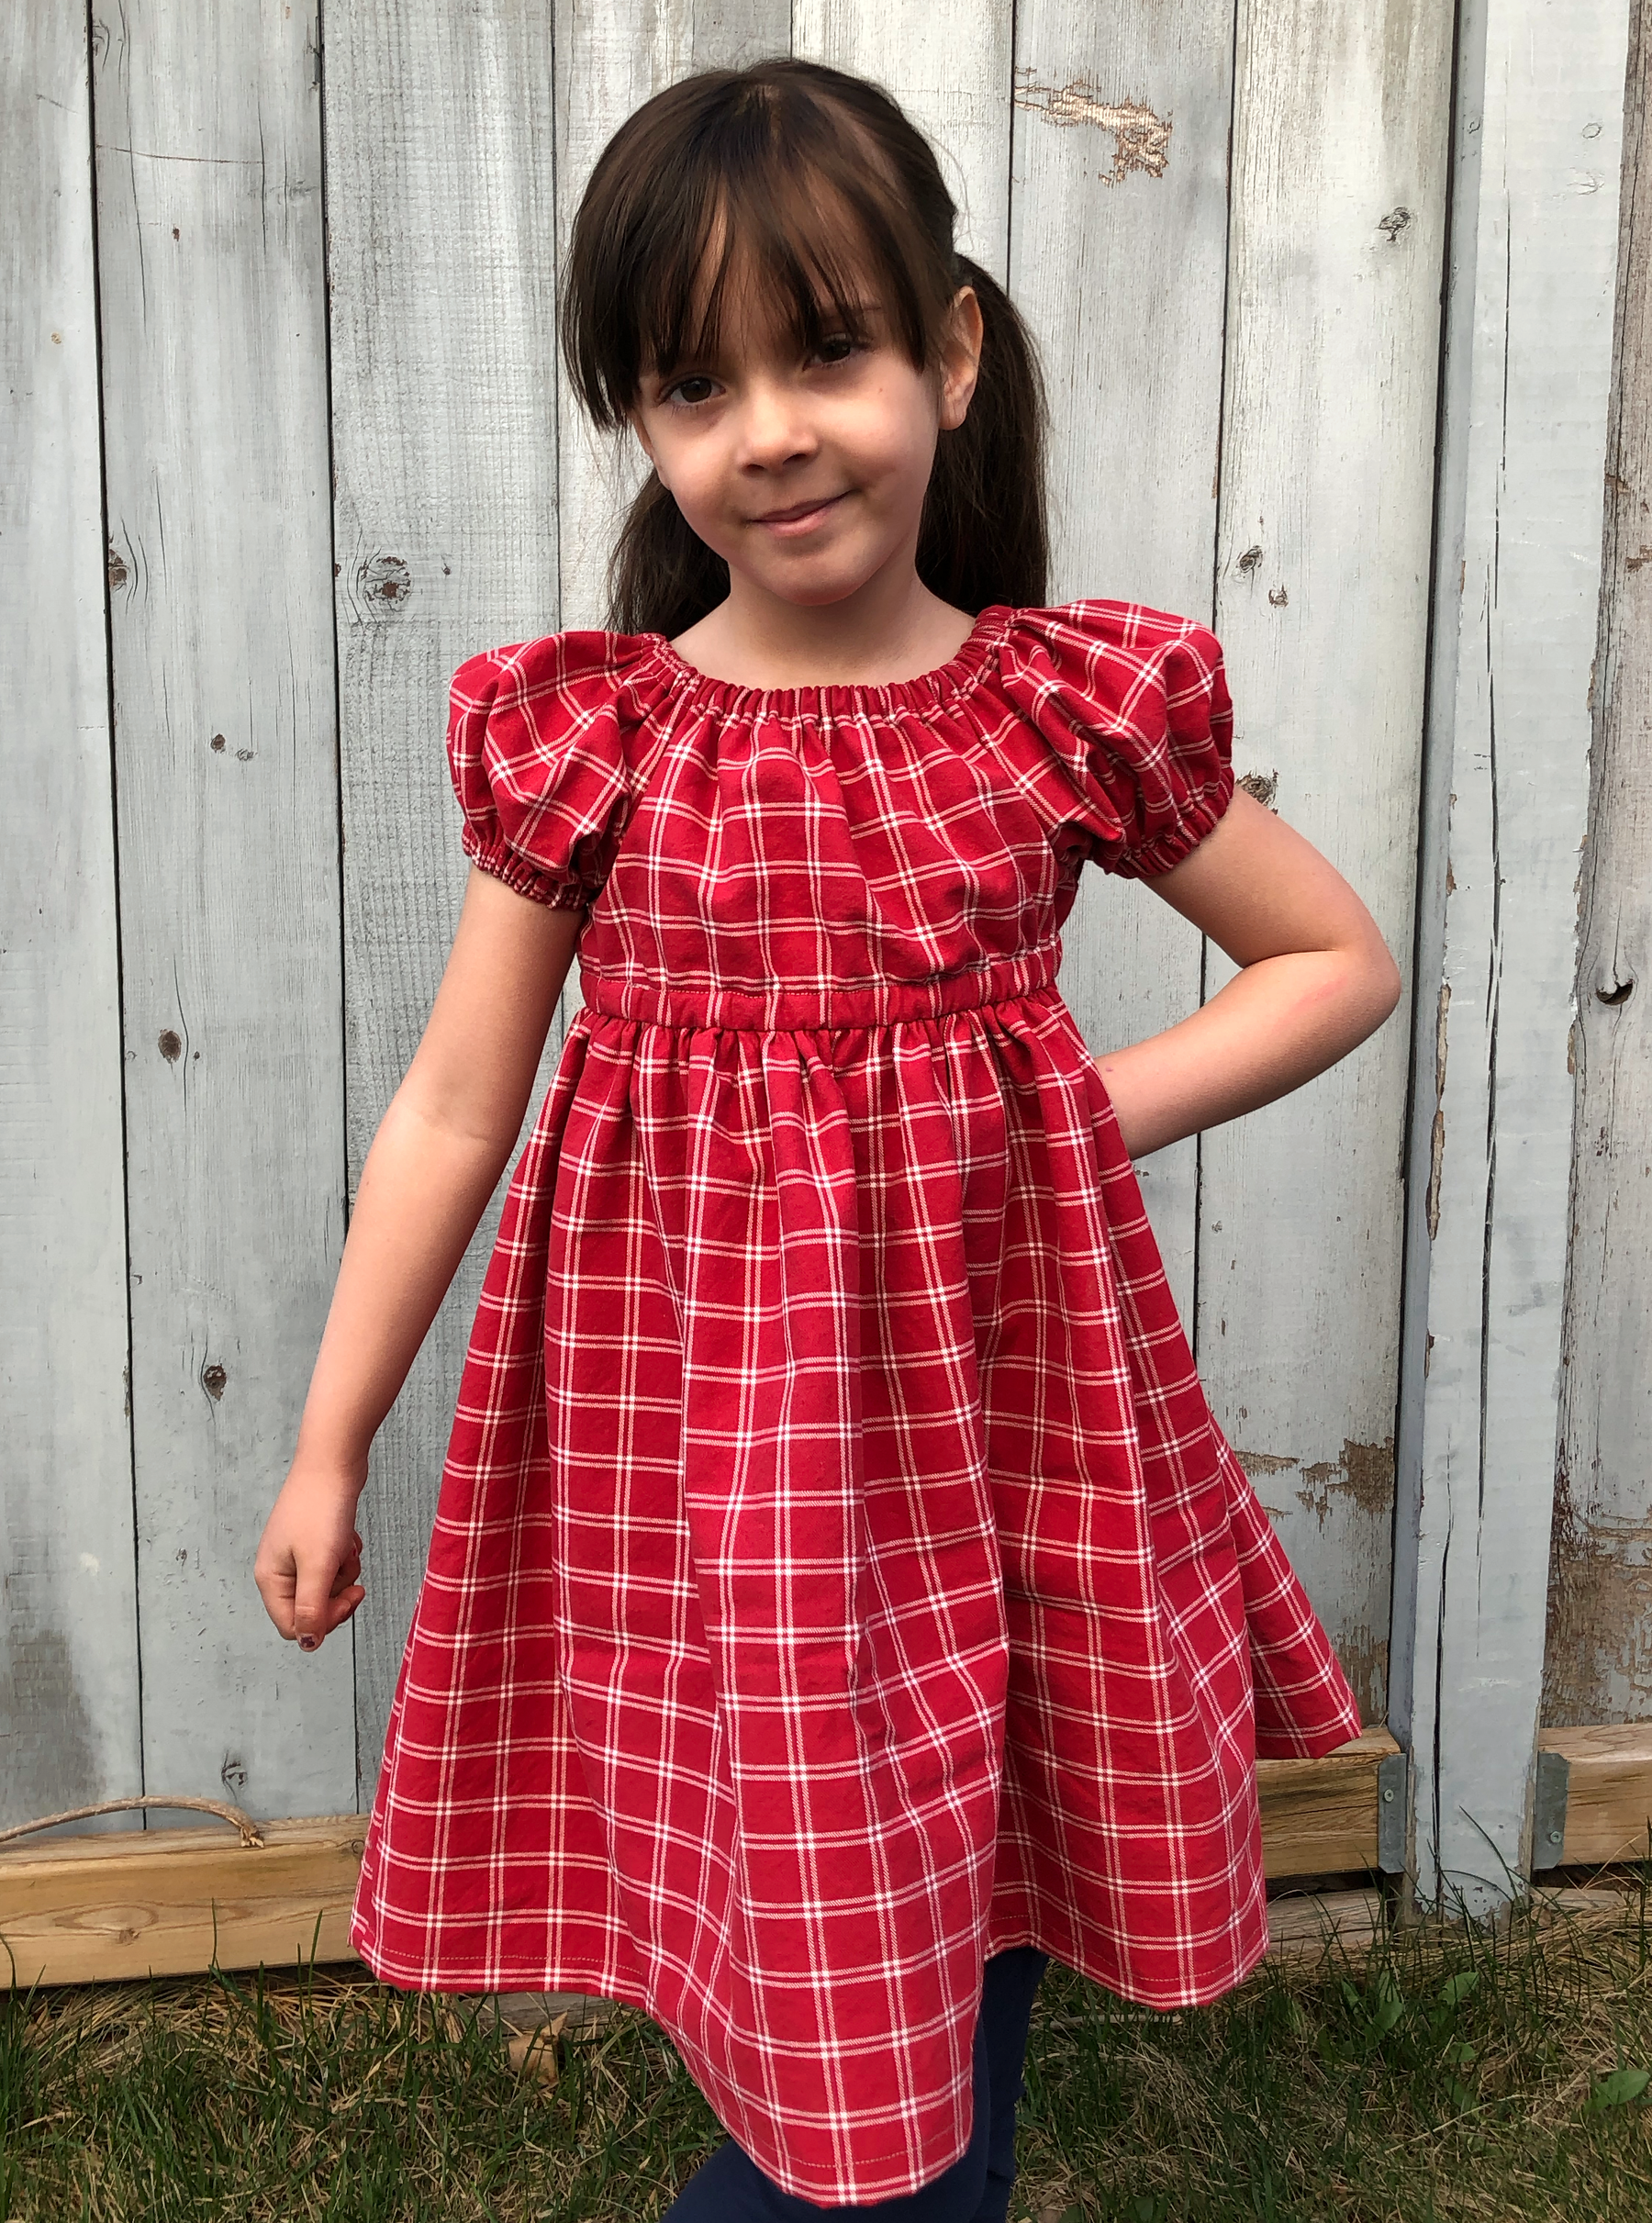 Collins Top and Dress Pattern